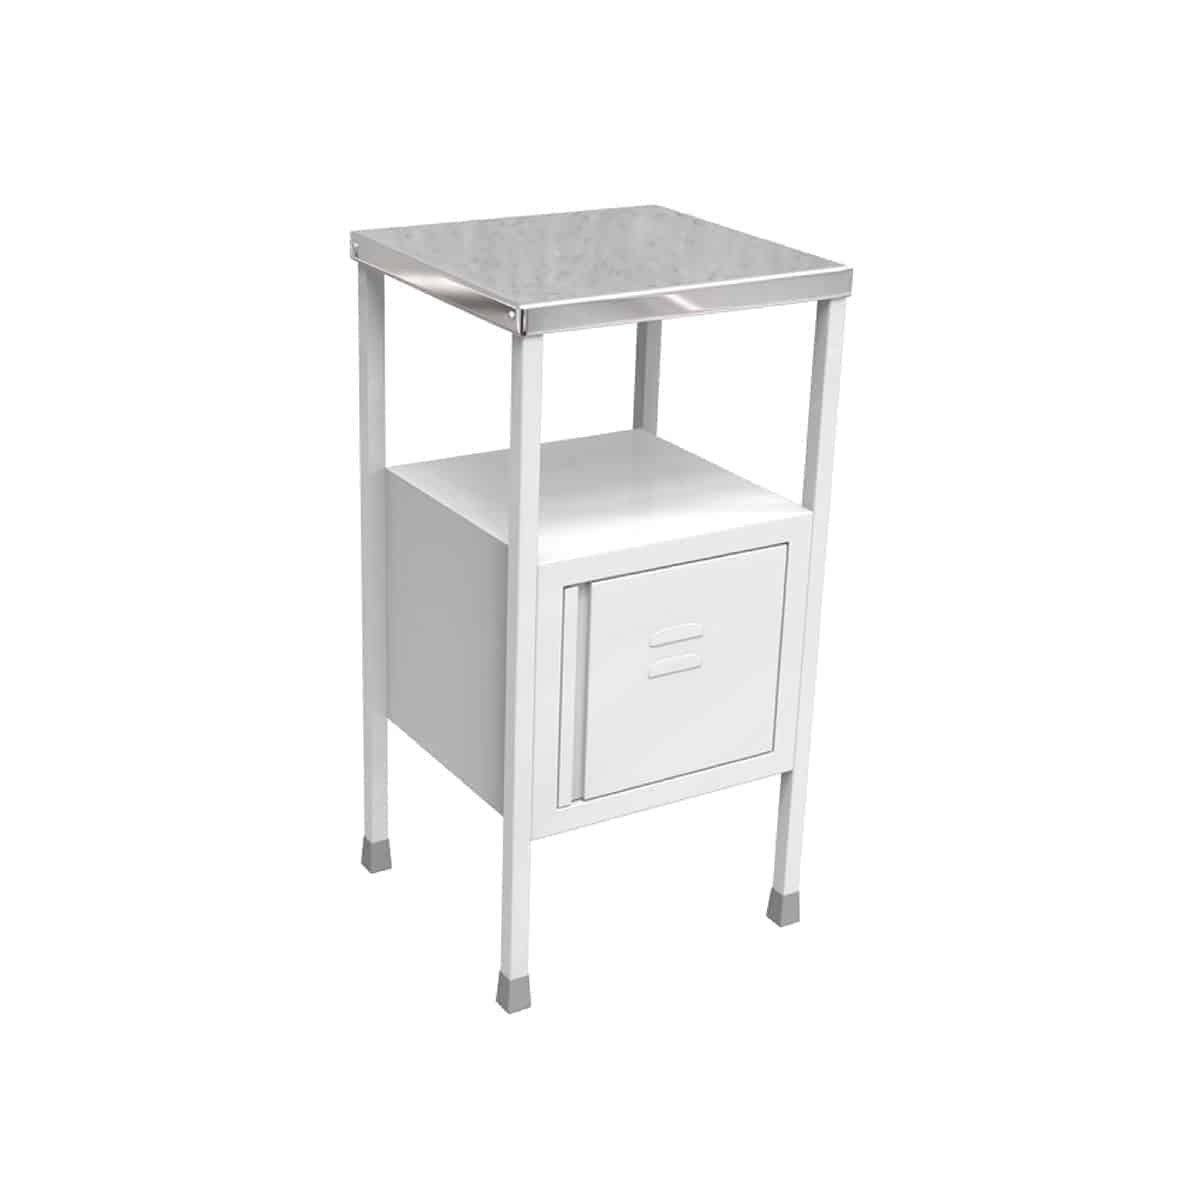 Single side covered White colour hospital bedside table with SS Tray on the top